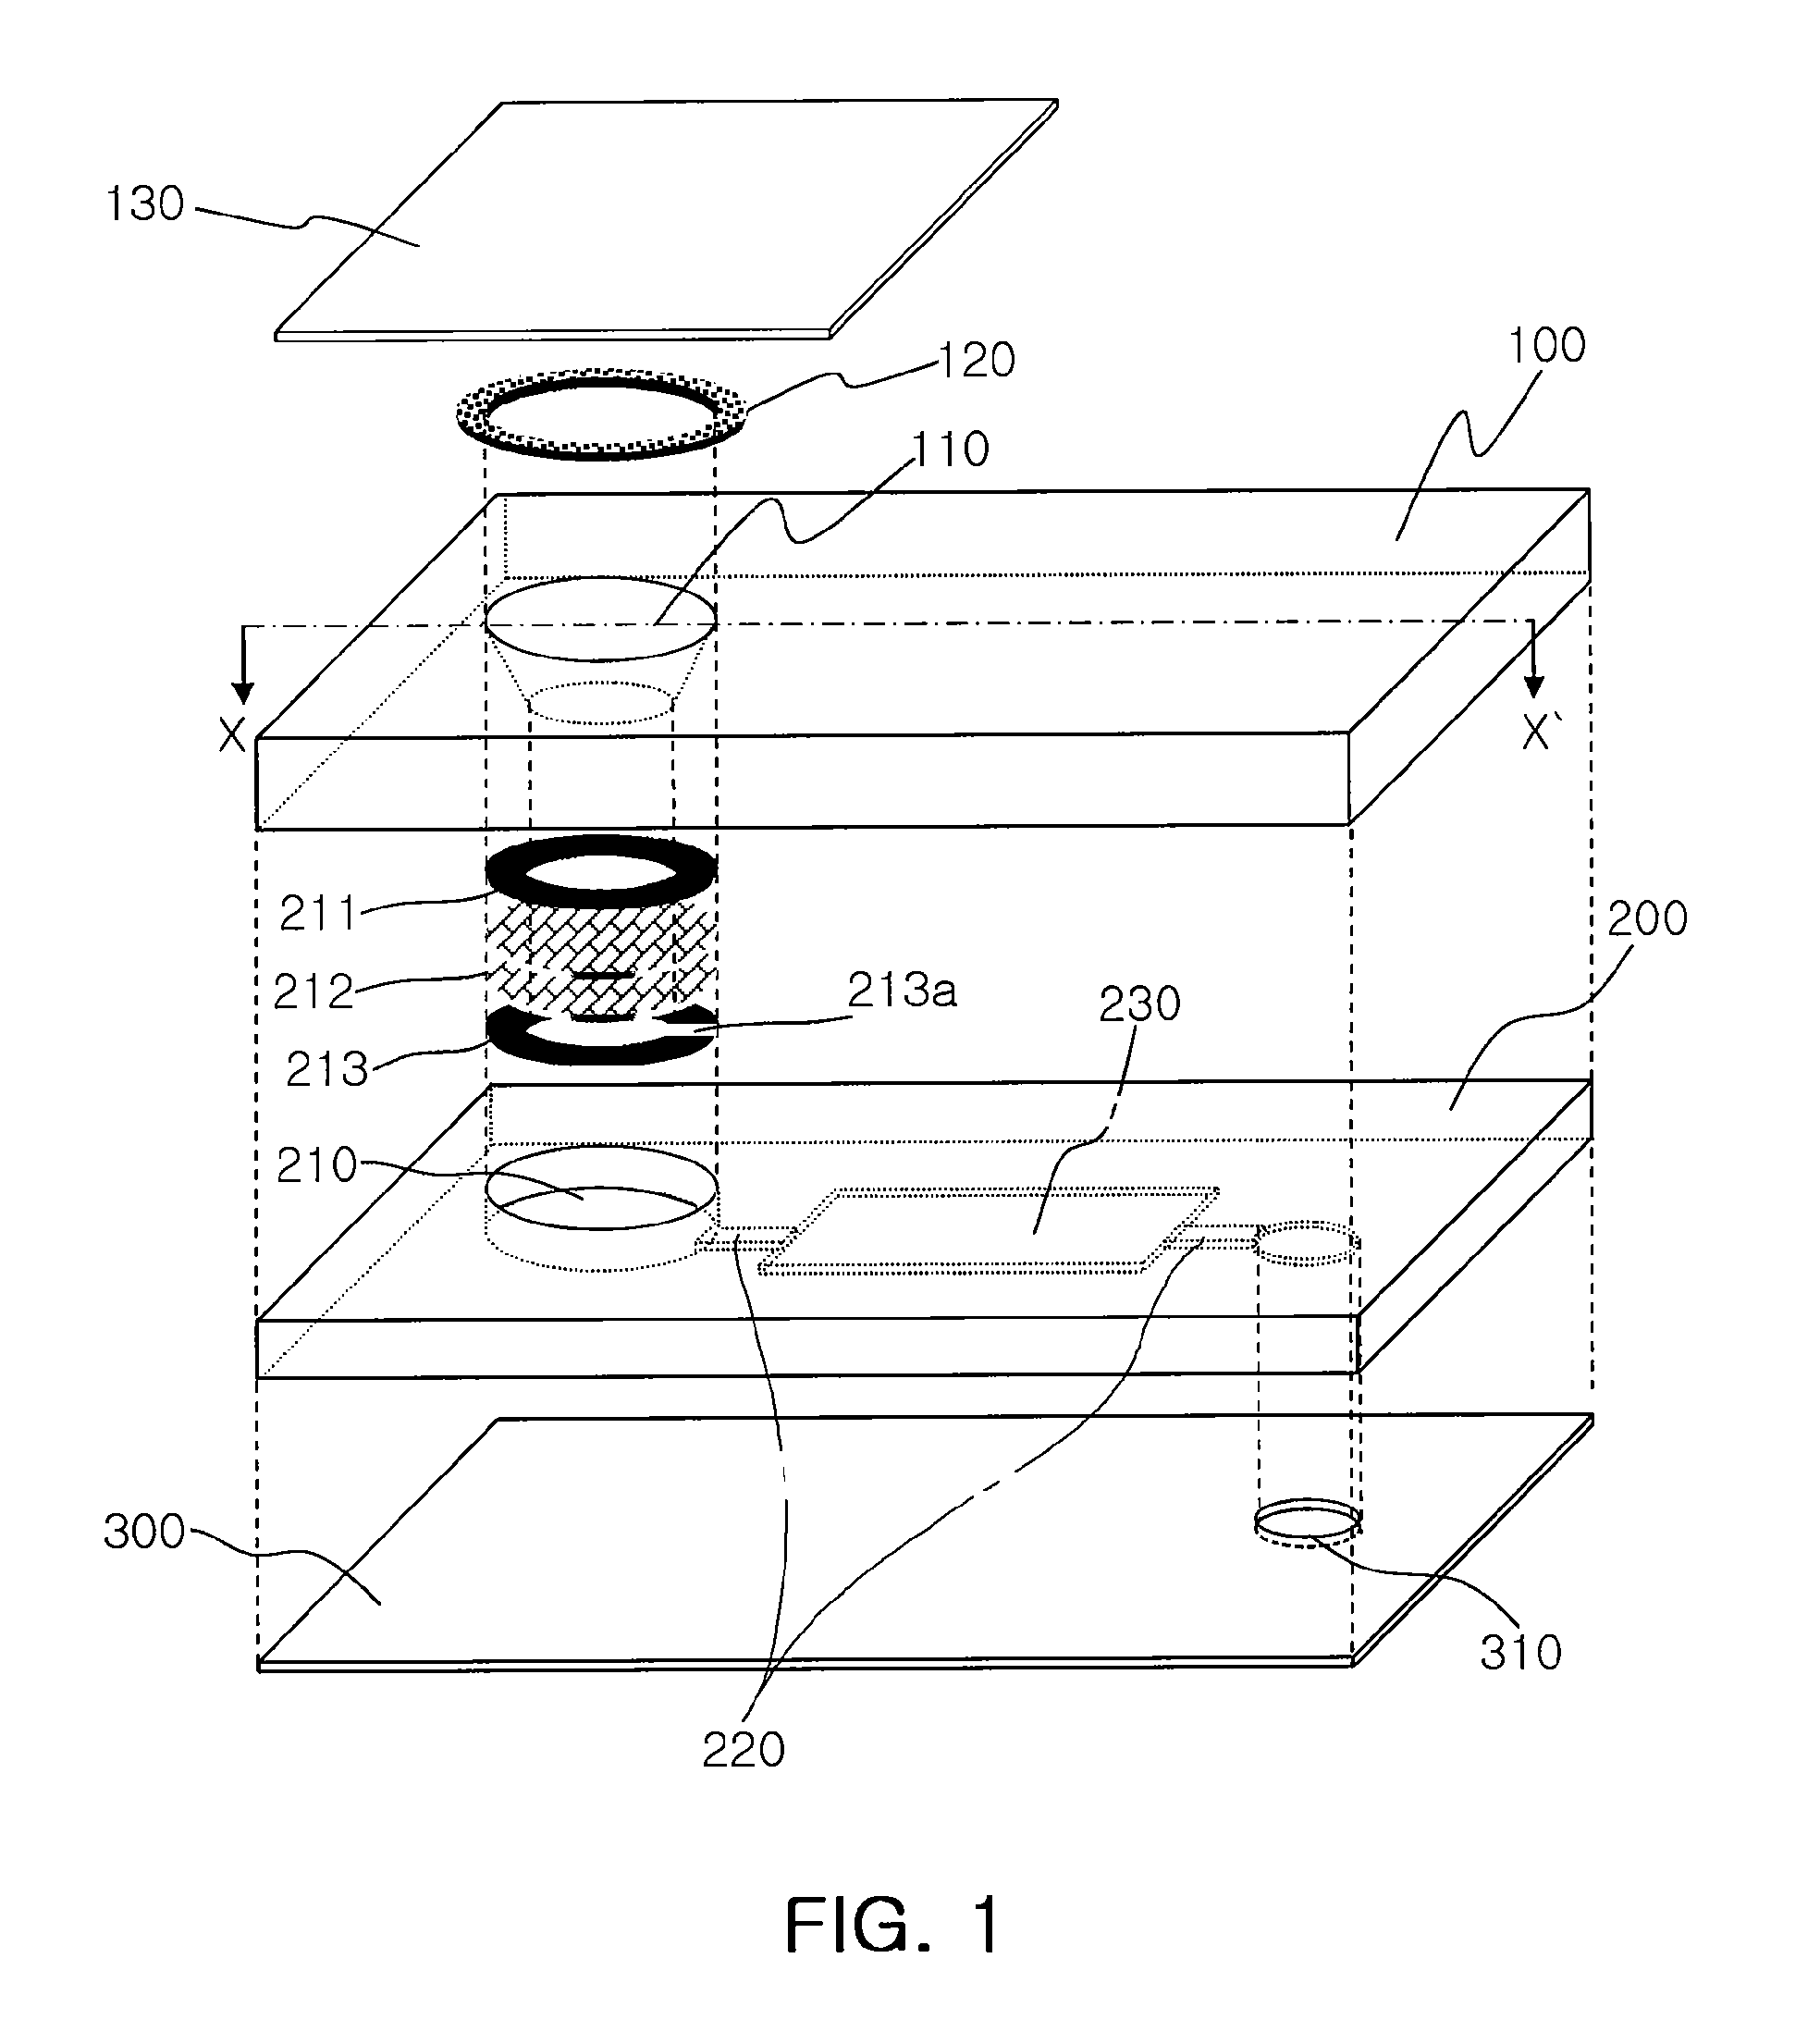 Disposable multi-layered filtration device for the separation of blood plasma